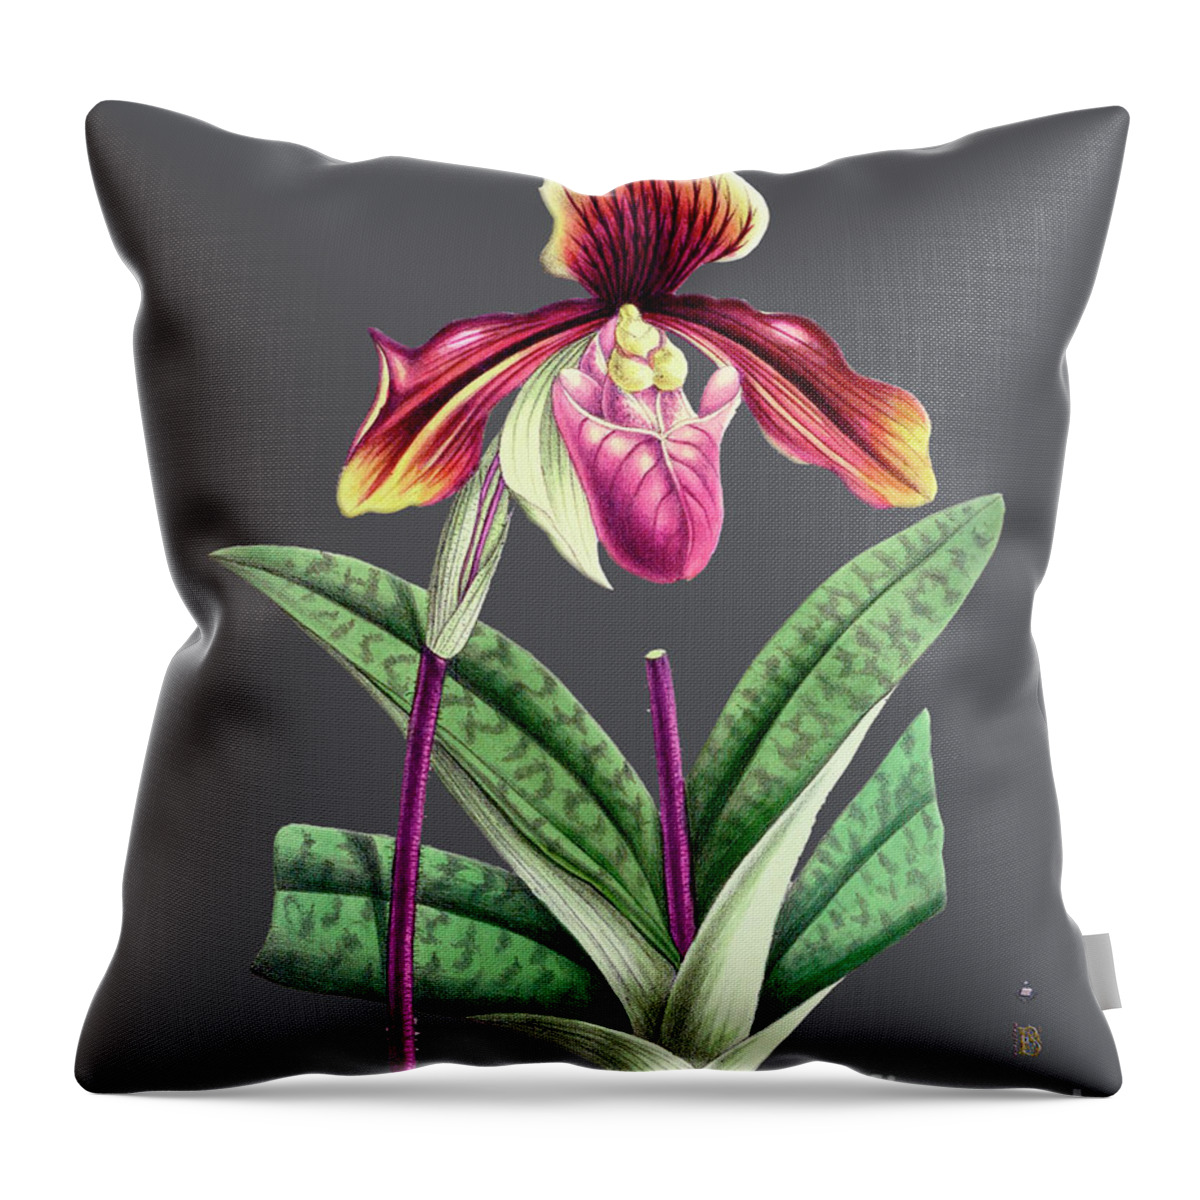 Vintage Throw Pillow featuring the digital art Orchid Old Print #10 by Baptiste Posters